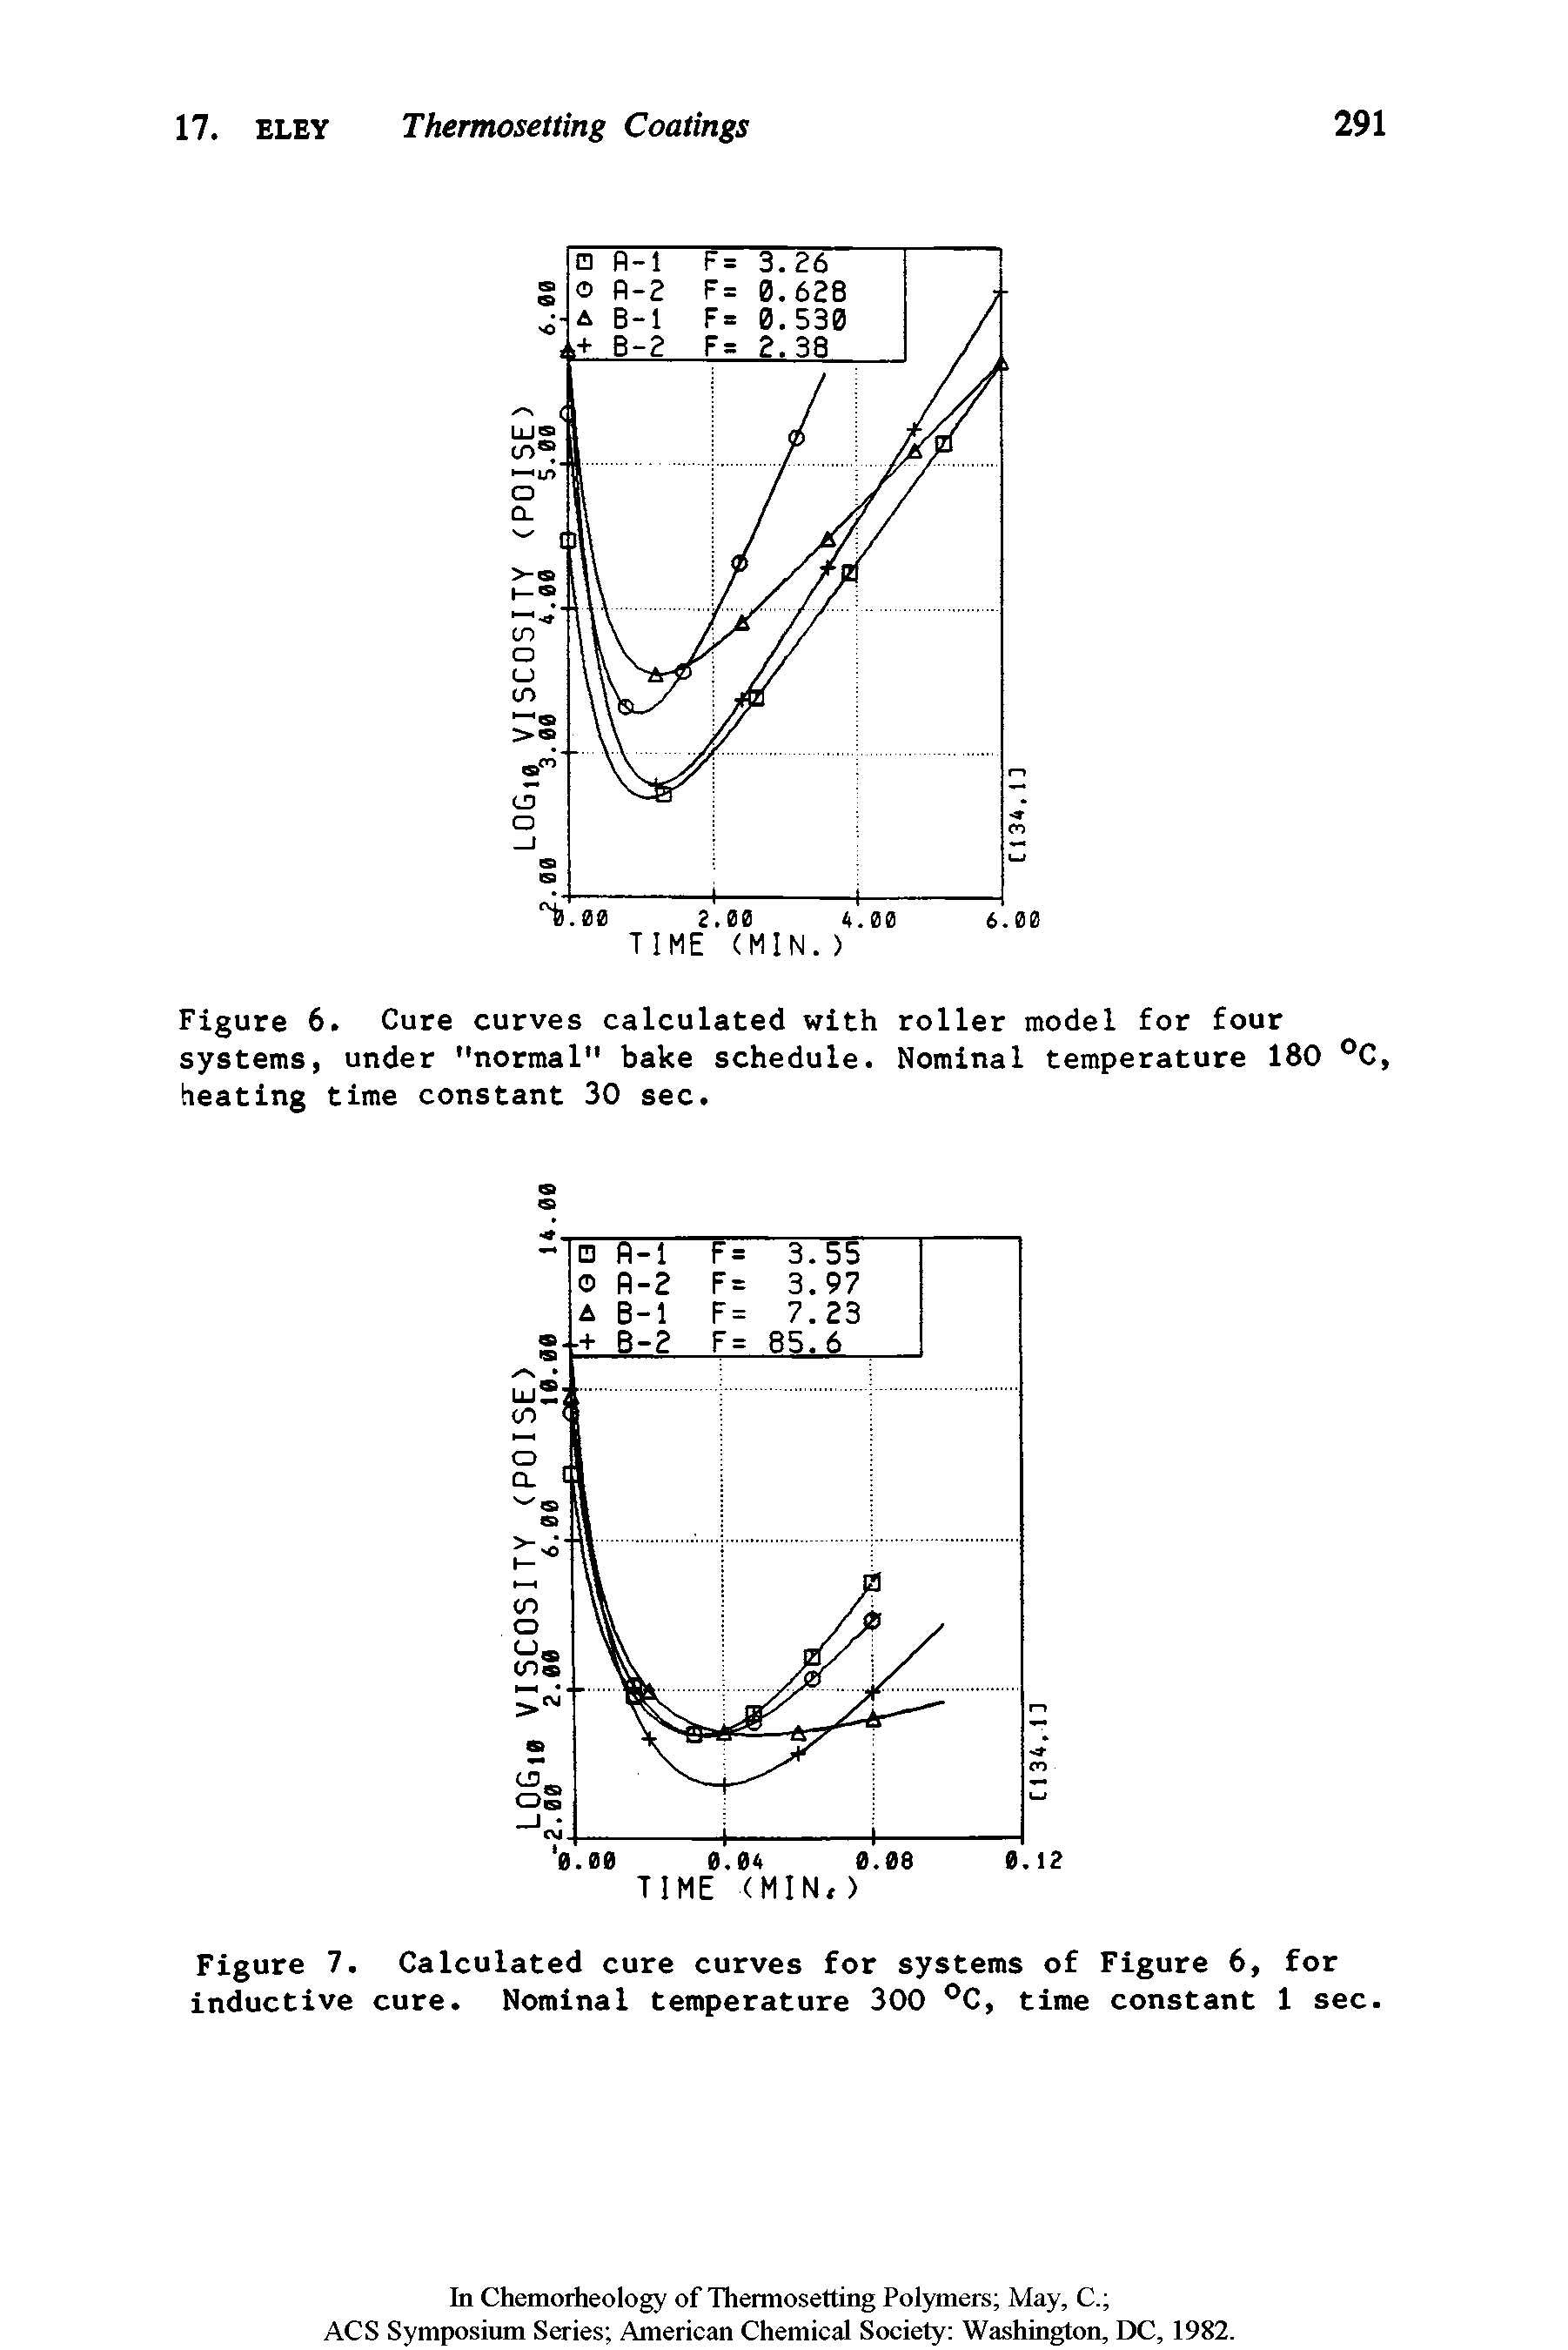 Figure 7. Calculated cure curves for systems of Figure 6, for inductive cure. Nominal temperature 300 C, time constant 1 sec.